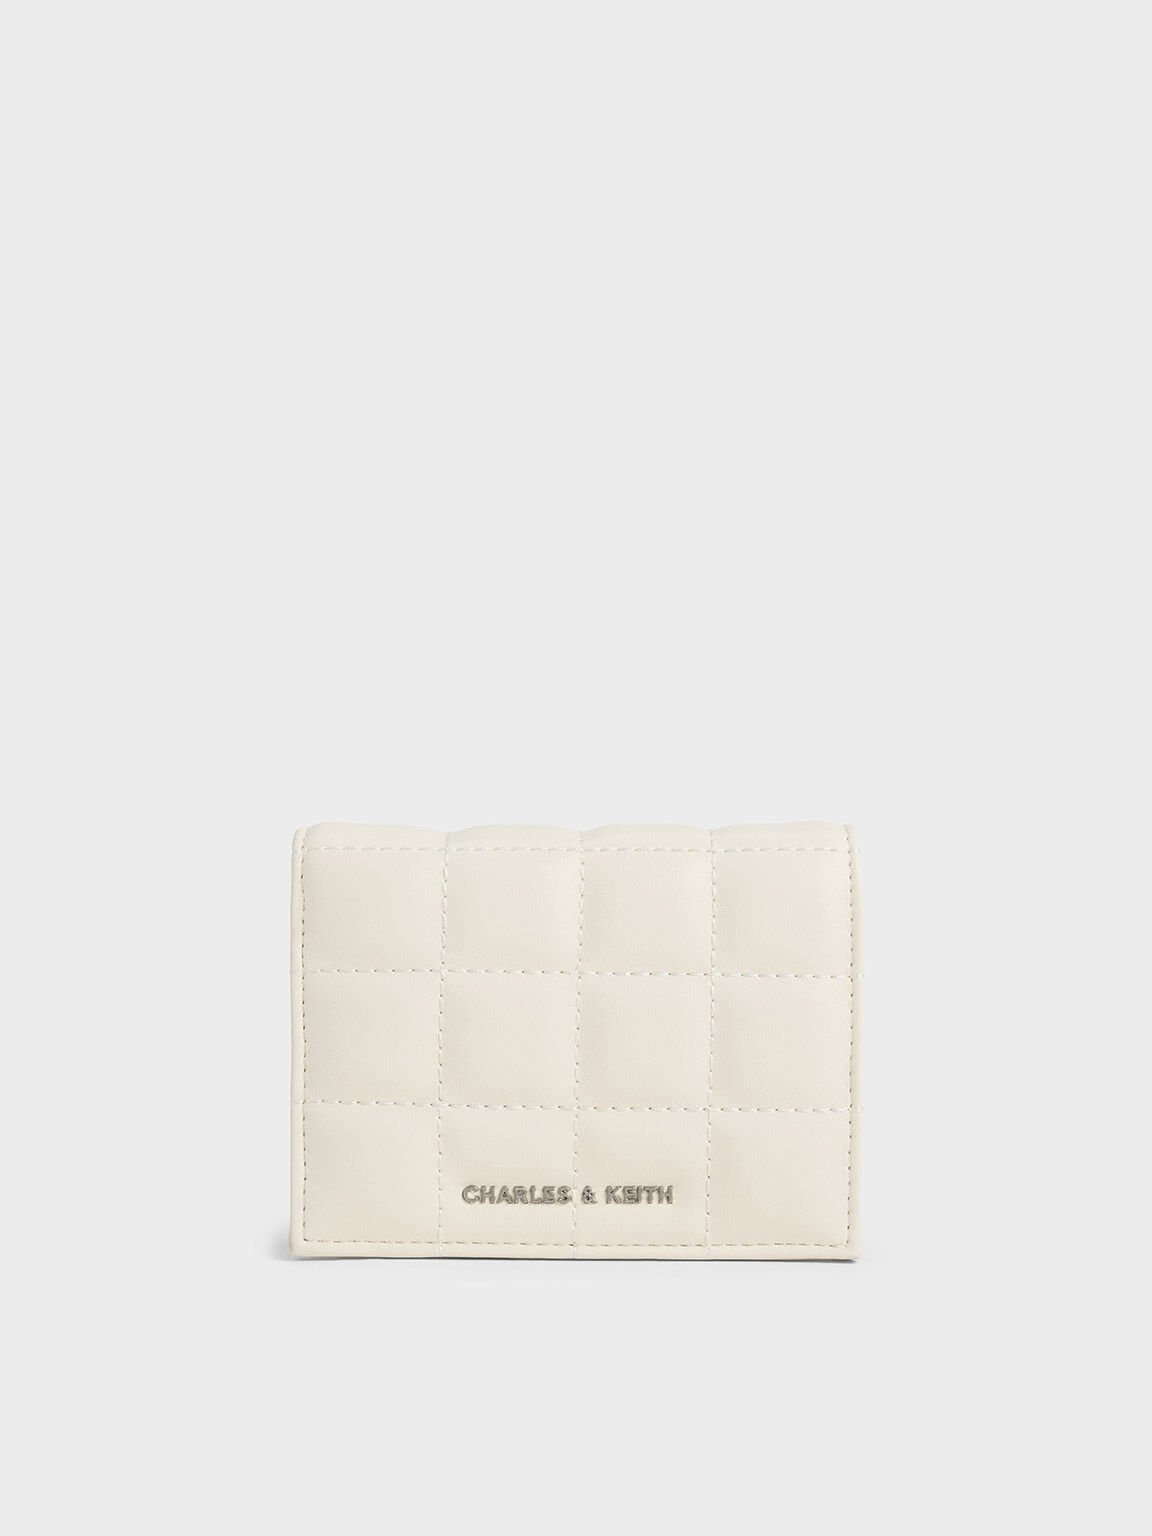 Women's Wallets | Shop Exclusive Styles | CHARLES & KEITH 